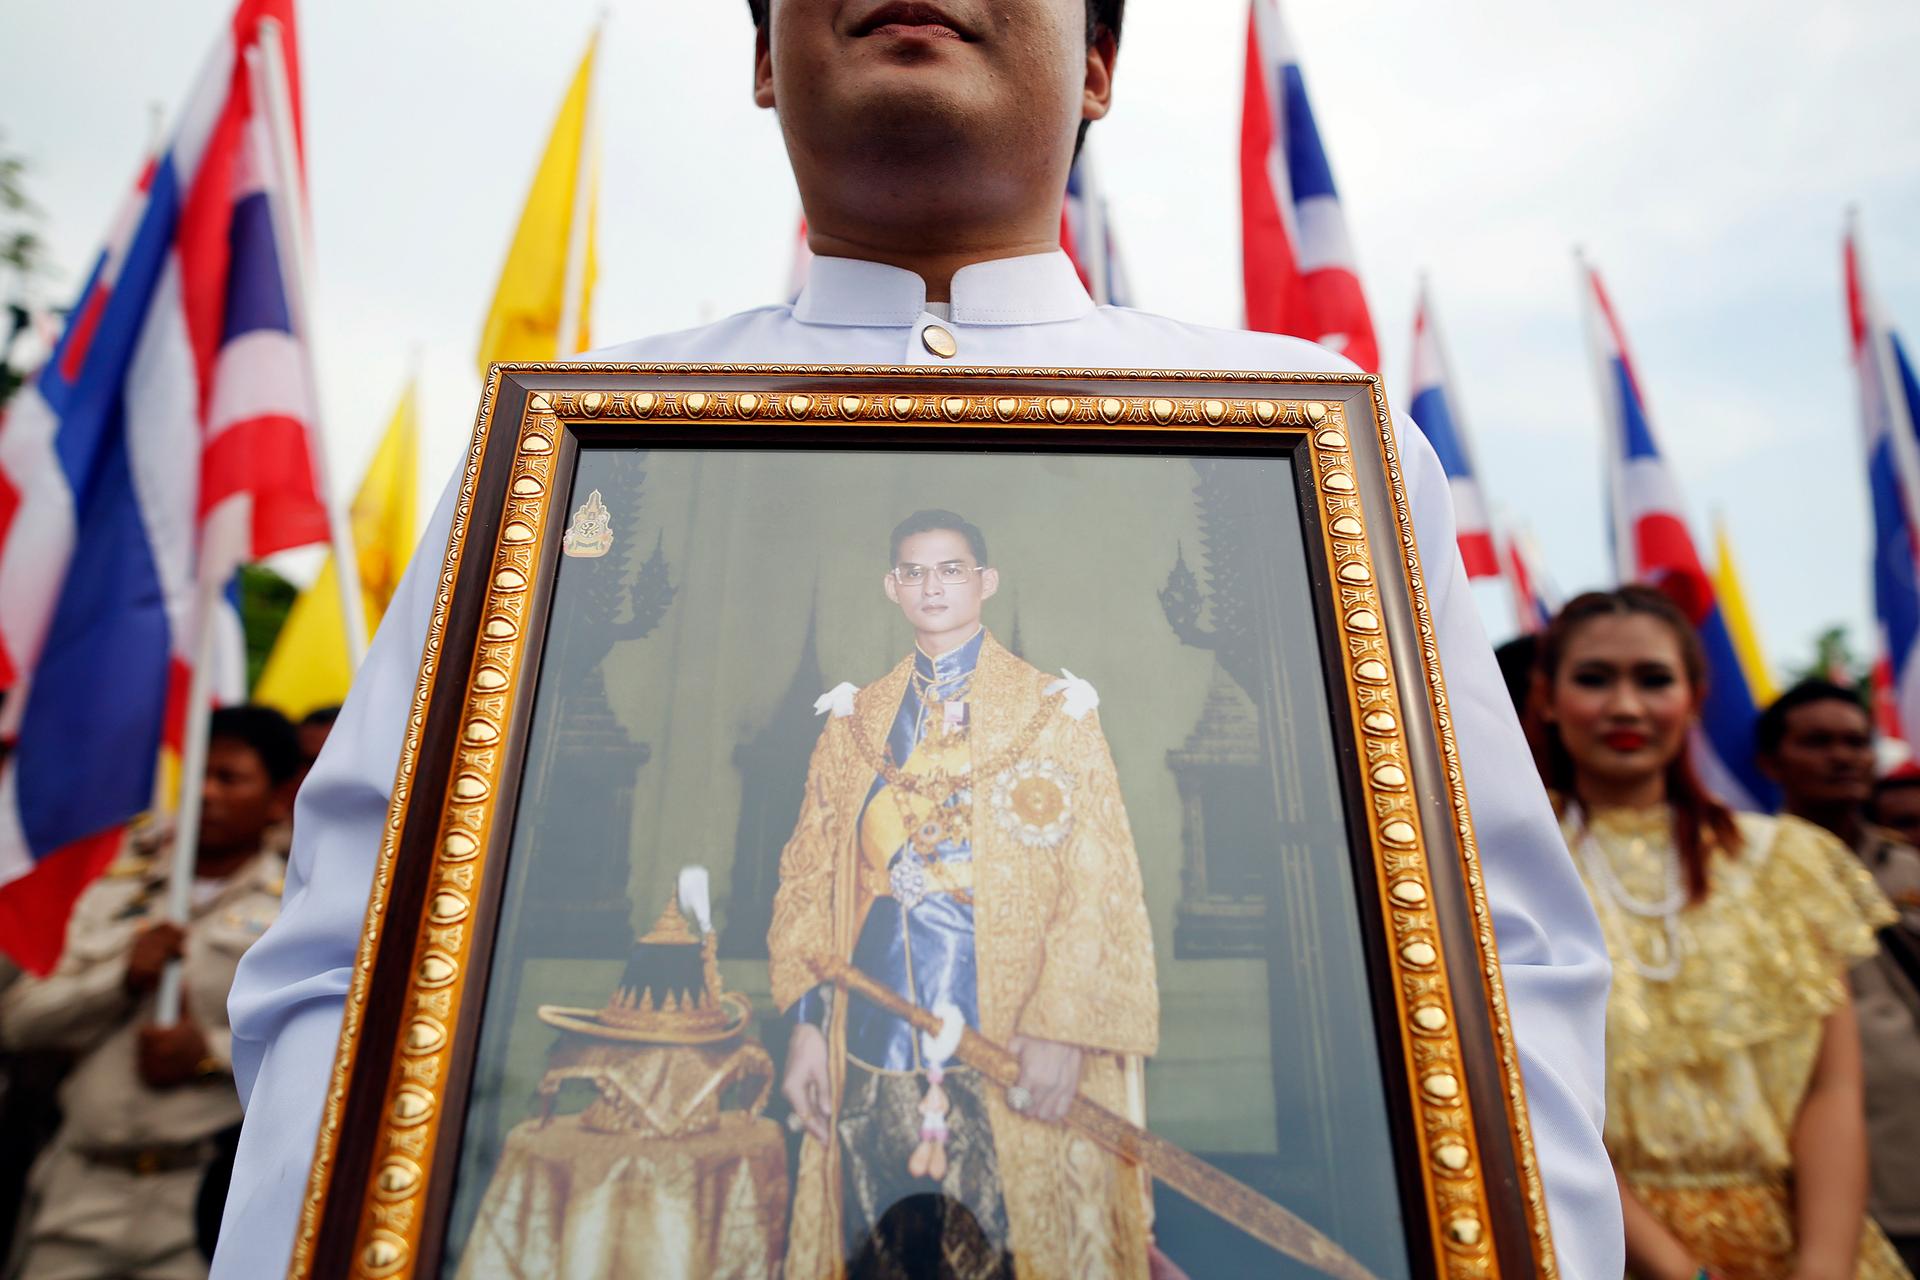 A well-wisher holds a picture of Thailand's King Bhumibol Adulyadej as he joins anti-government protesters gathering outside the Grand Palace on Coronation Day in Bangkok May 5, 2014.